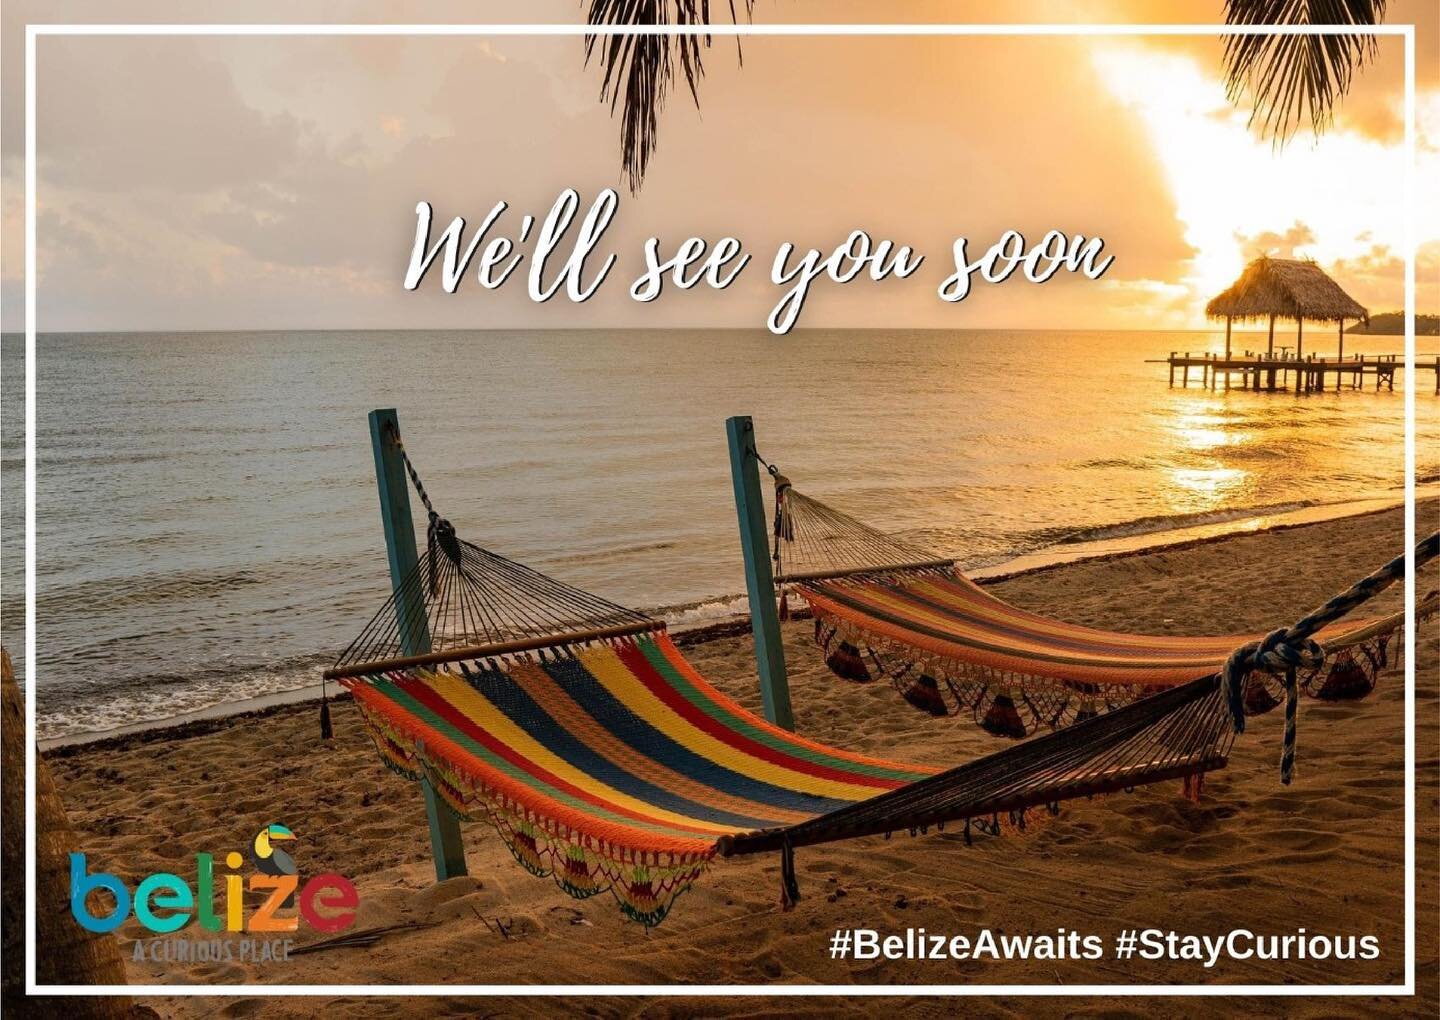 We are waiting for you! The Caribbean Sea is waiting for you!Social distancing in it&rsquo;s best form is waiting for you! #belizeadventures #jaguaradventurestravel #casaalmar #socialdistance